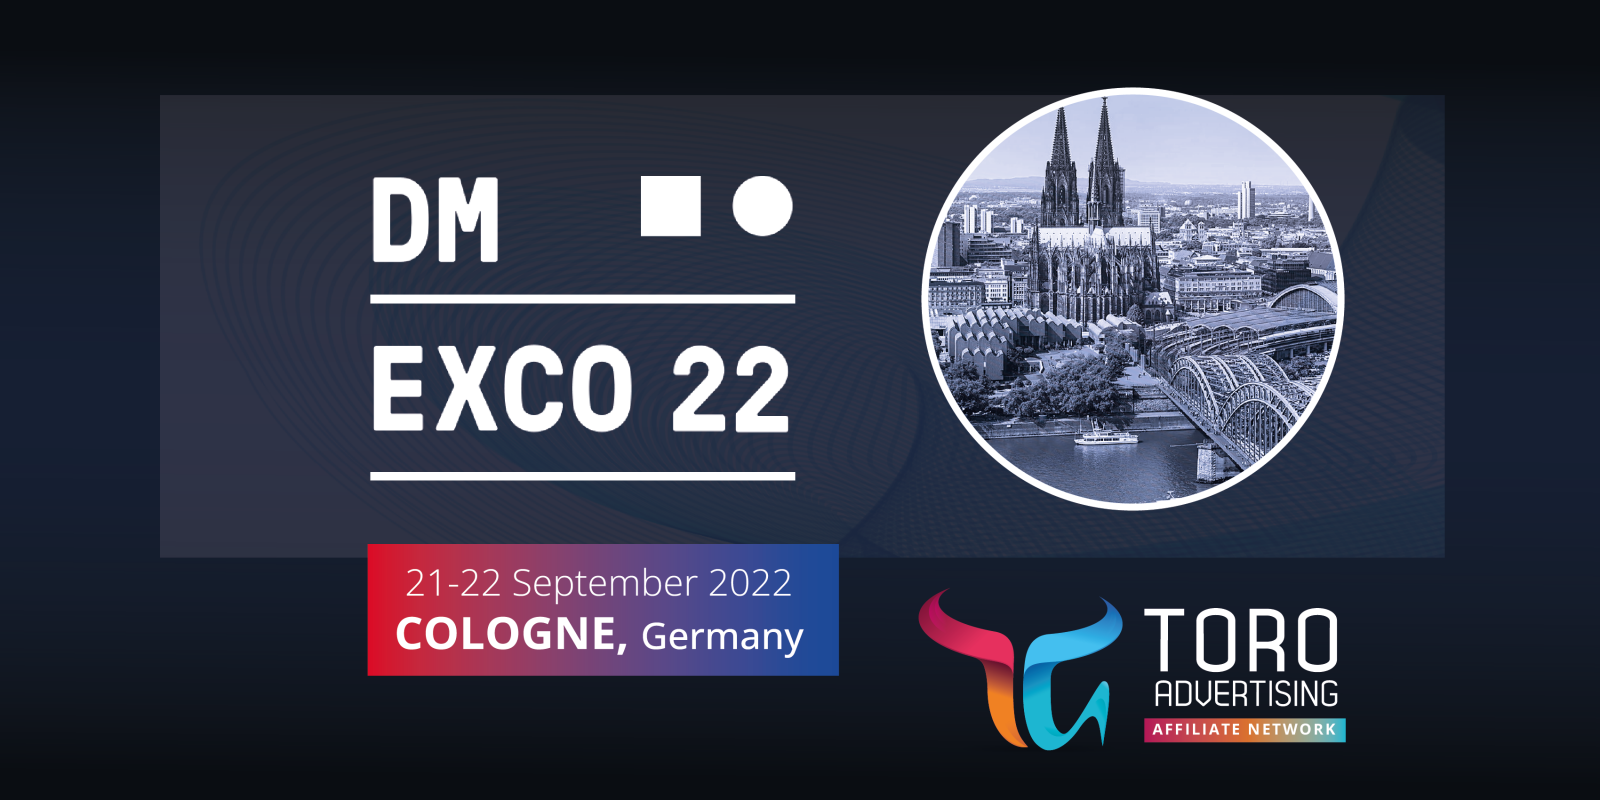 TORO Advertising - Affiliate Network is attending DMEXCO in Cologne